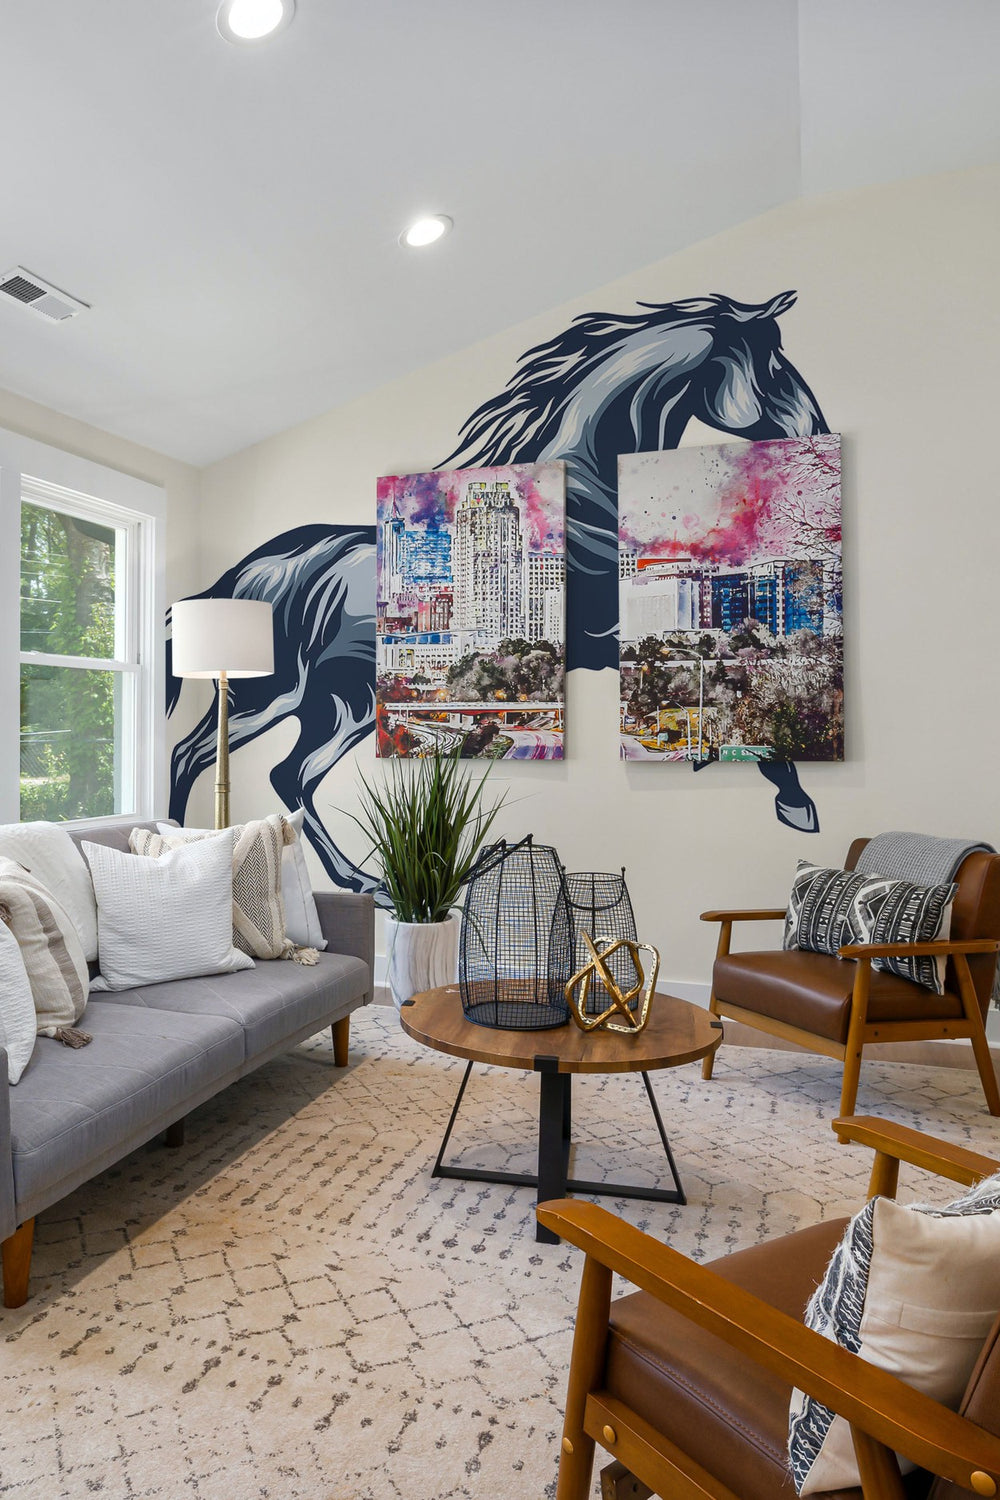 A stylish living room interior with a large wall mural of a blue horse and a colorful cityscape canvas.